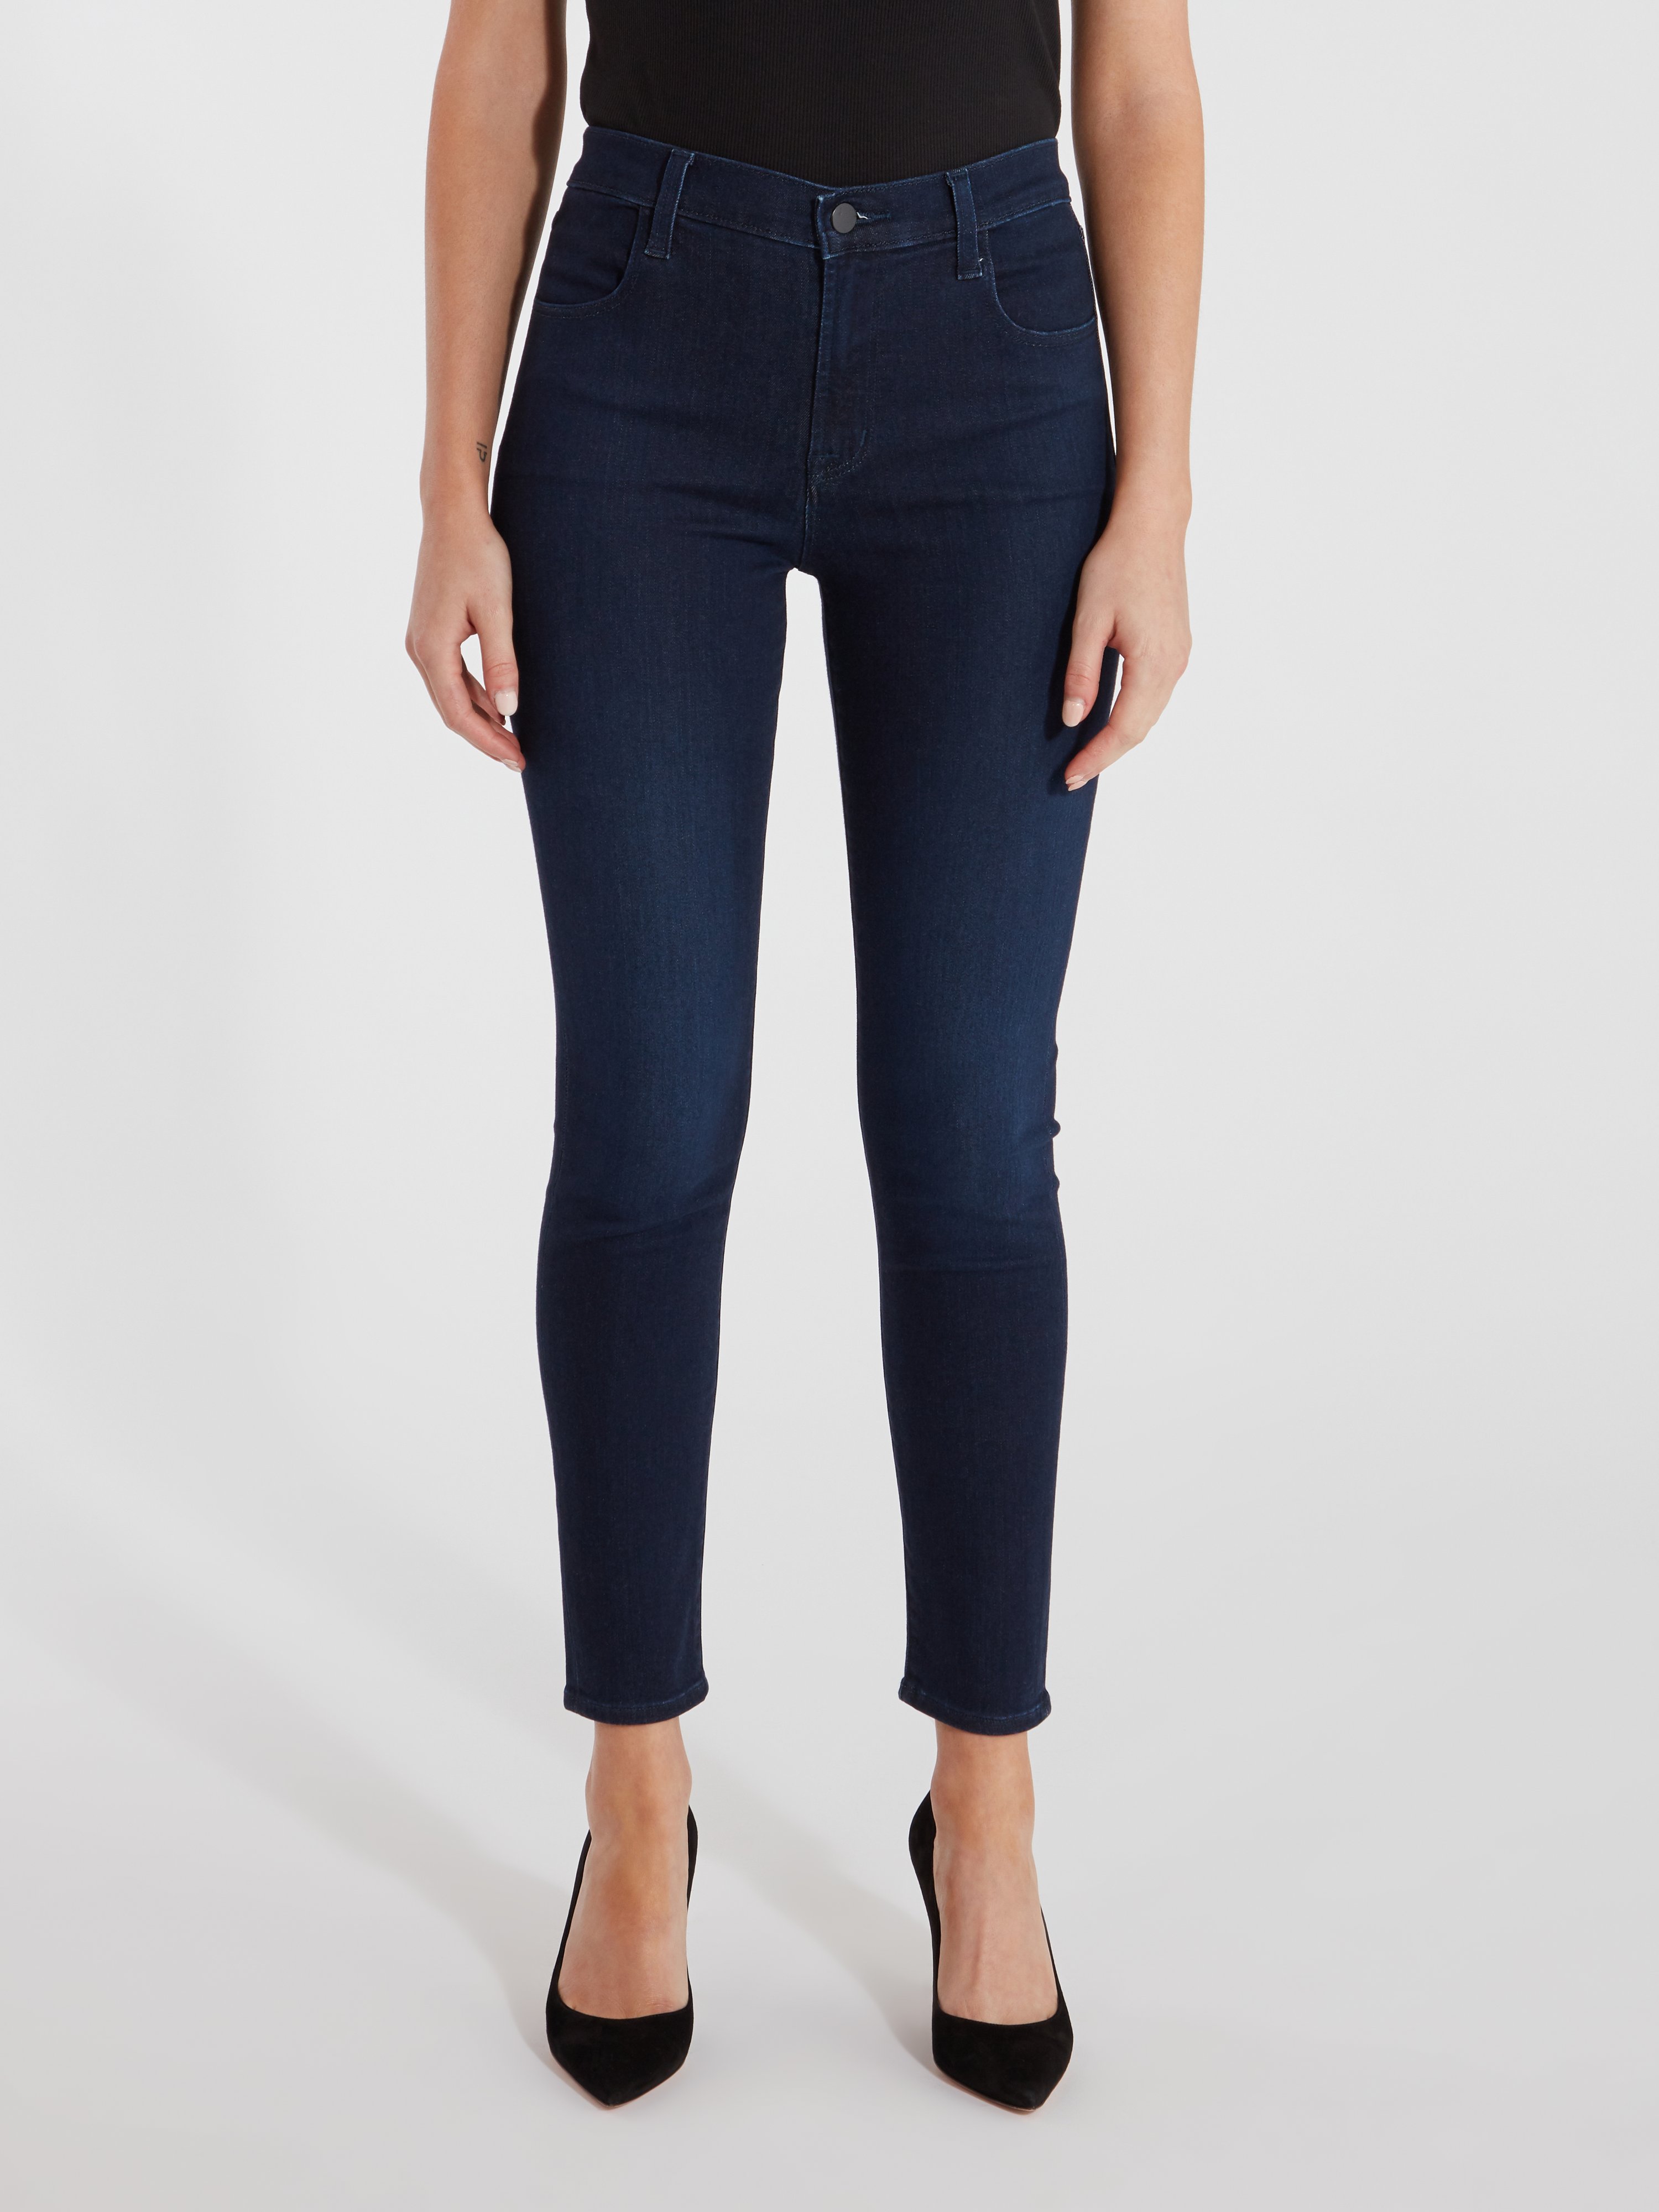 J Brand Alana High Rise Cropped Skinny Jeans In Chroma